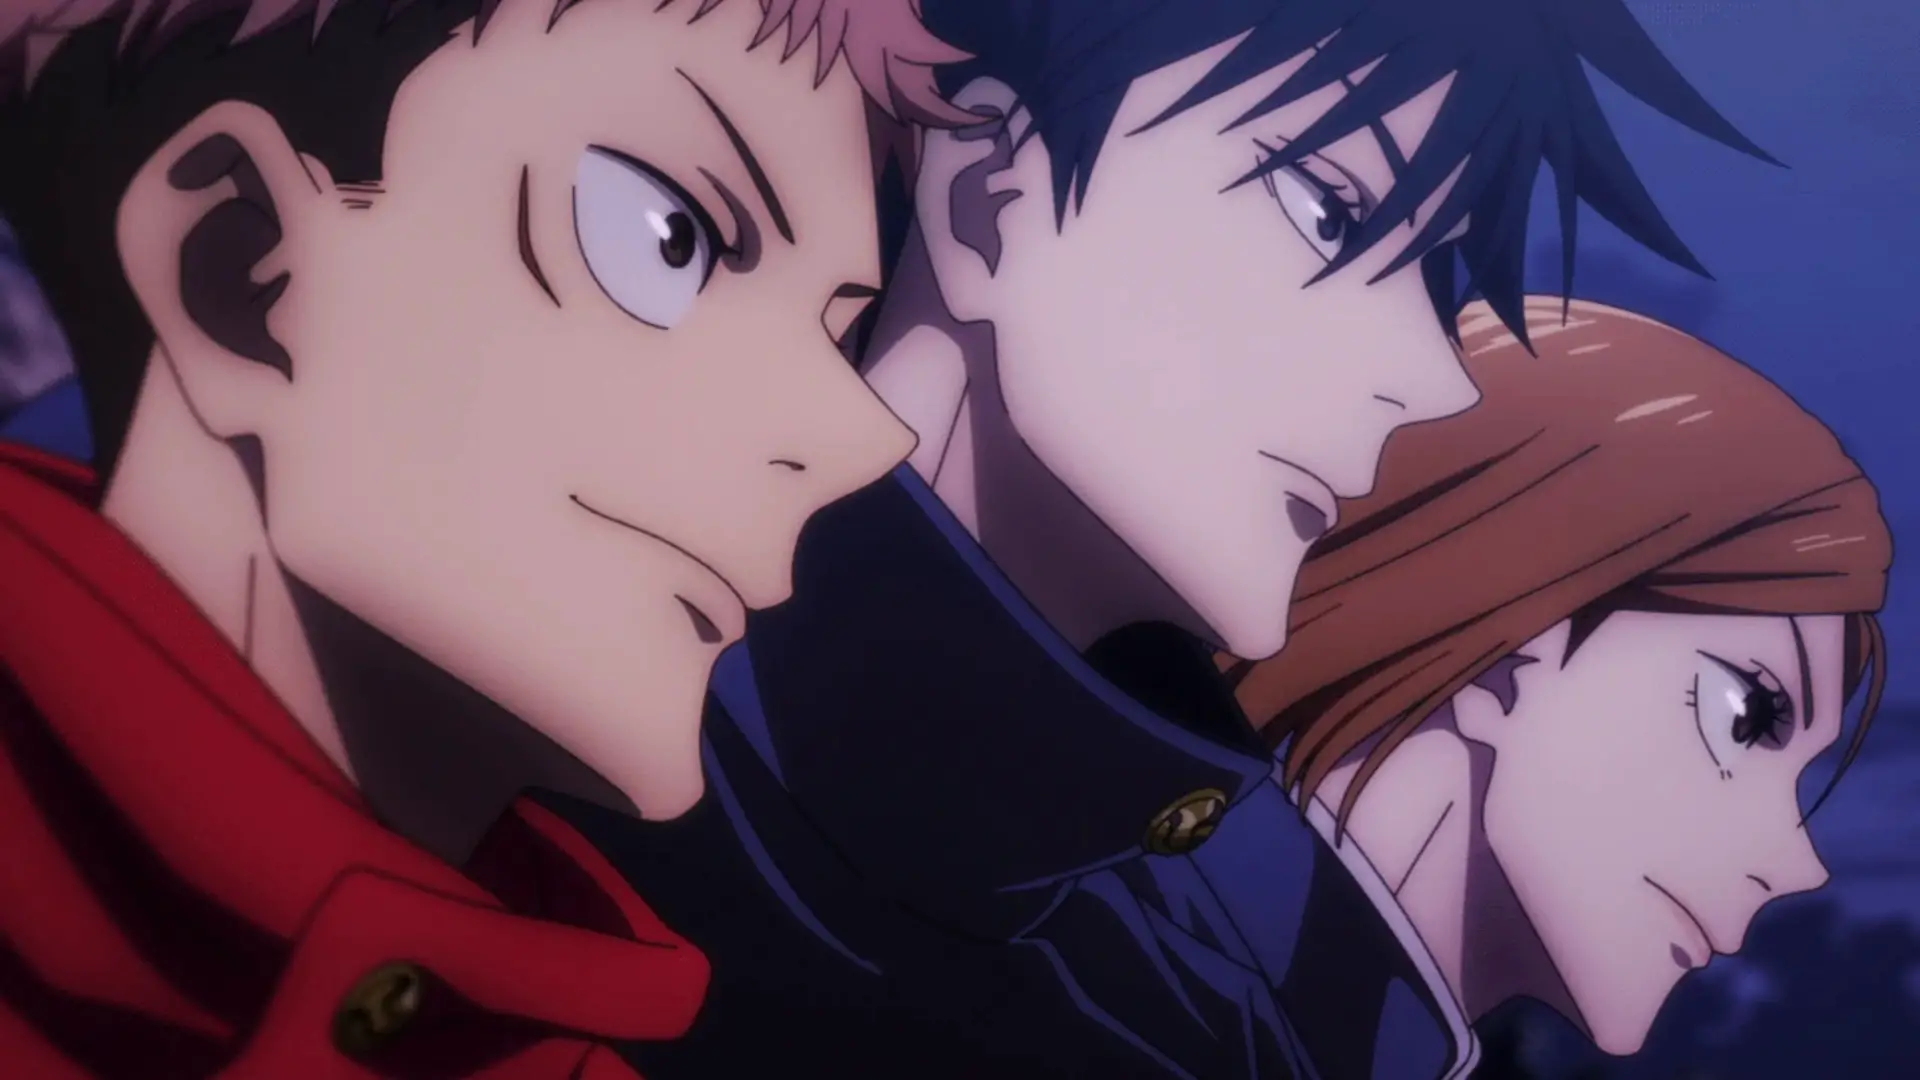 Hidden Clues and Epic Showdowns: Why Jujutsu Kaisen's Shibuya Incident Opening is a Must-See for Every Anime Fan